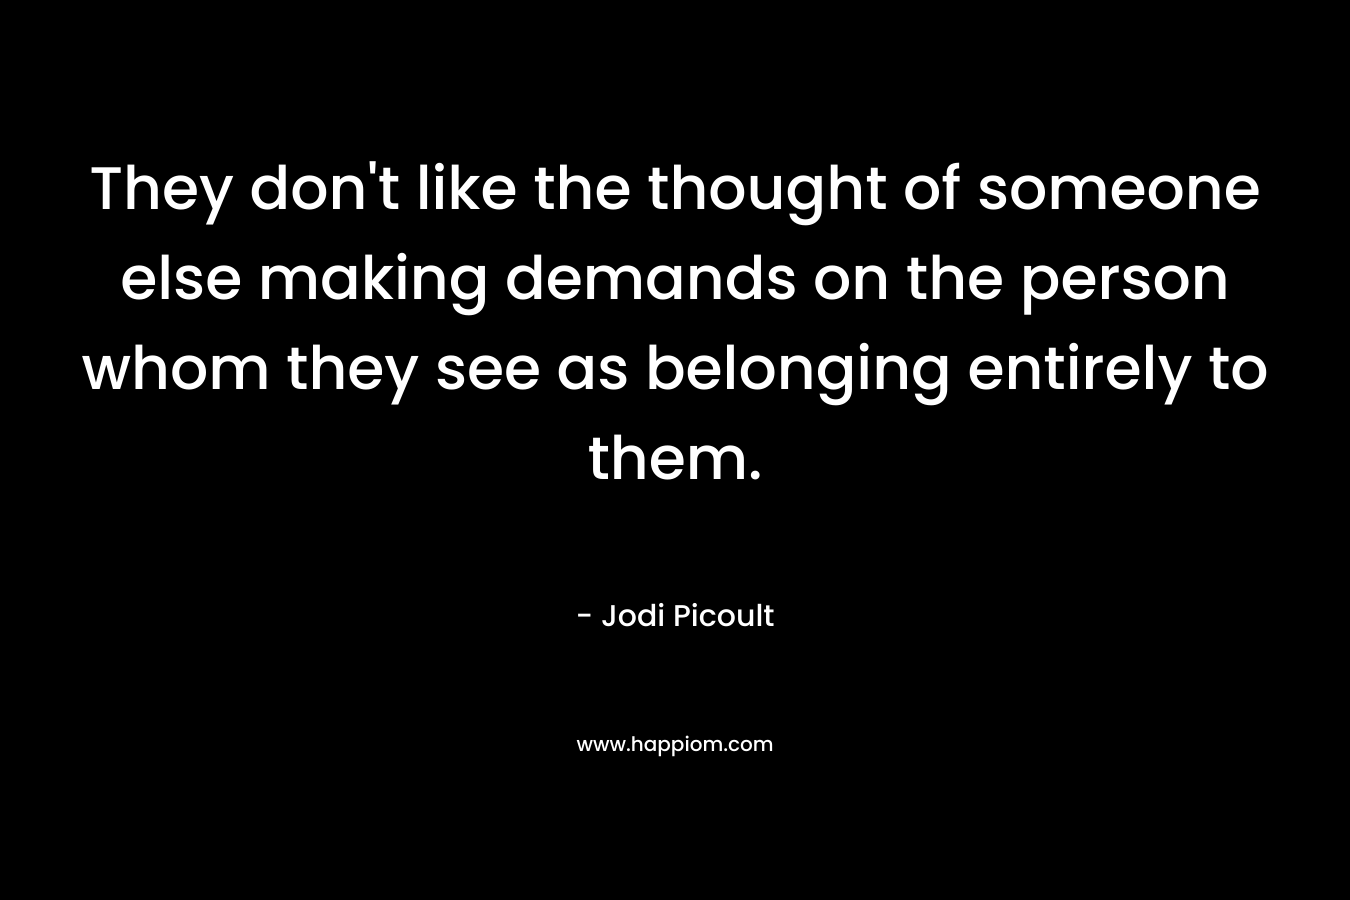 They don’t like the thought of someone else making demands on the person whom they see as belonging entirely to them. – Jodi Picoult